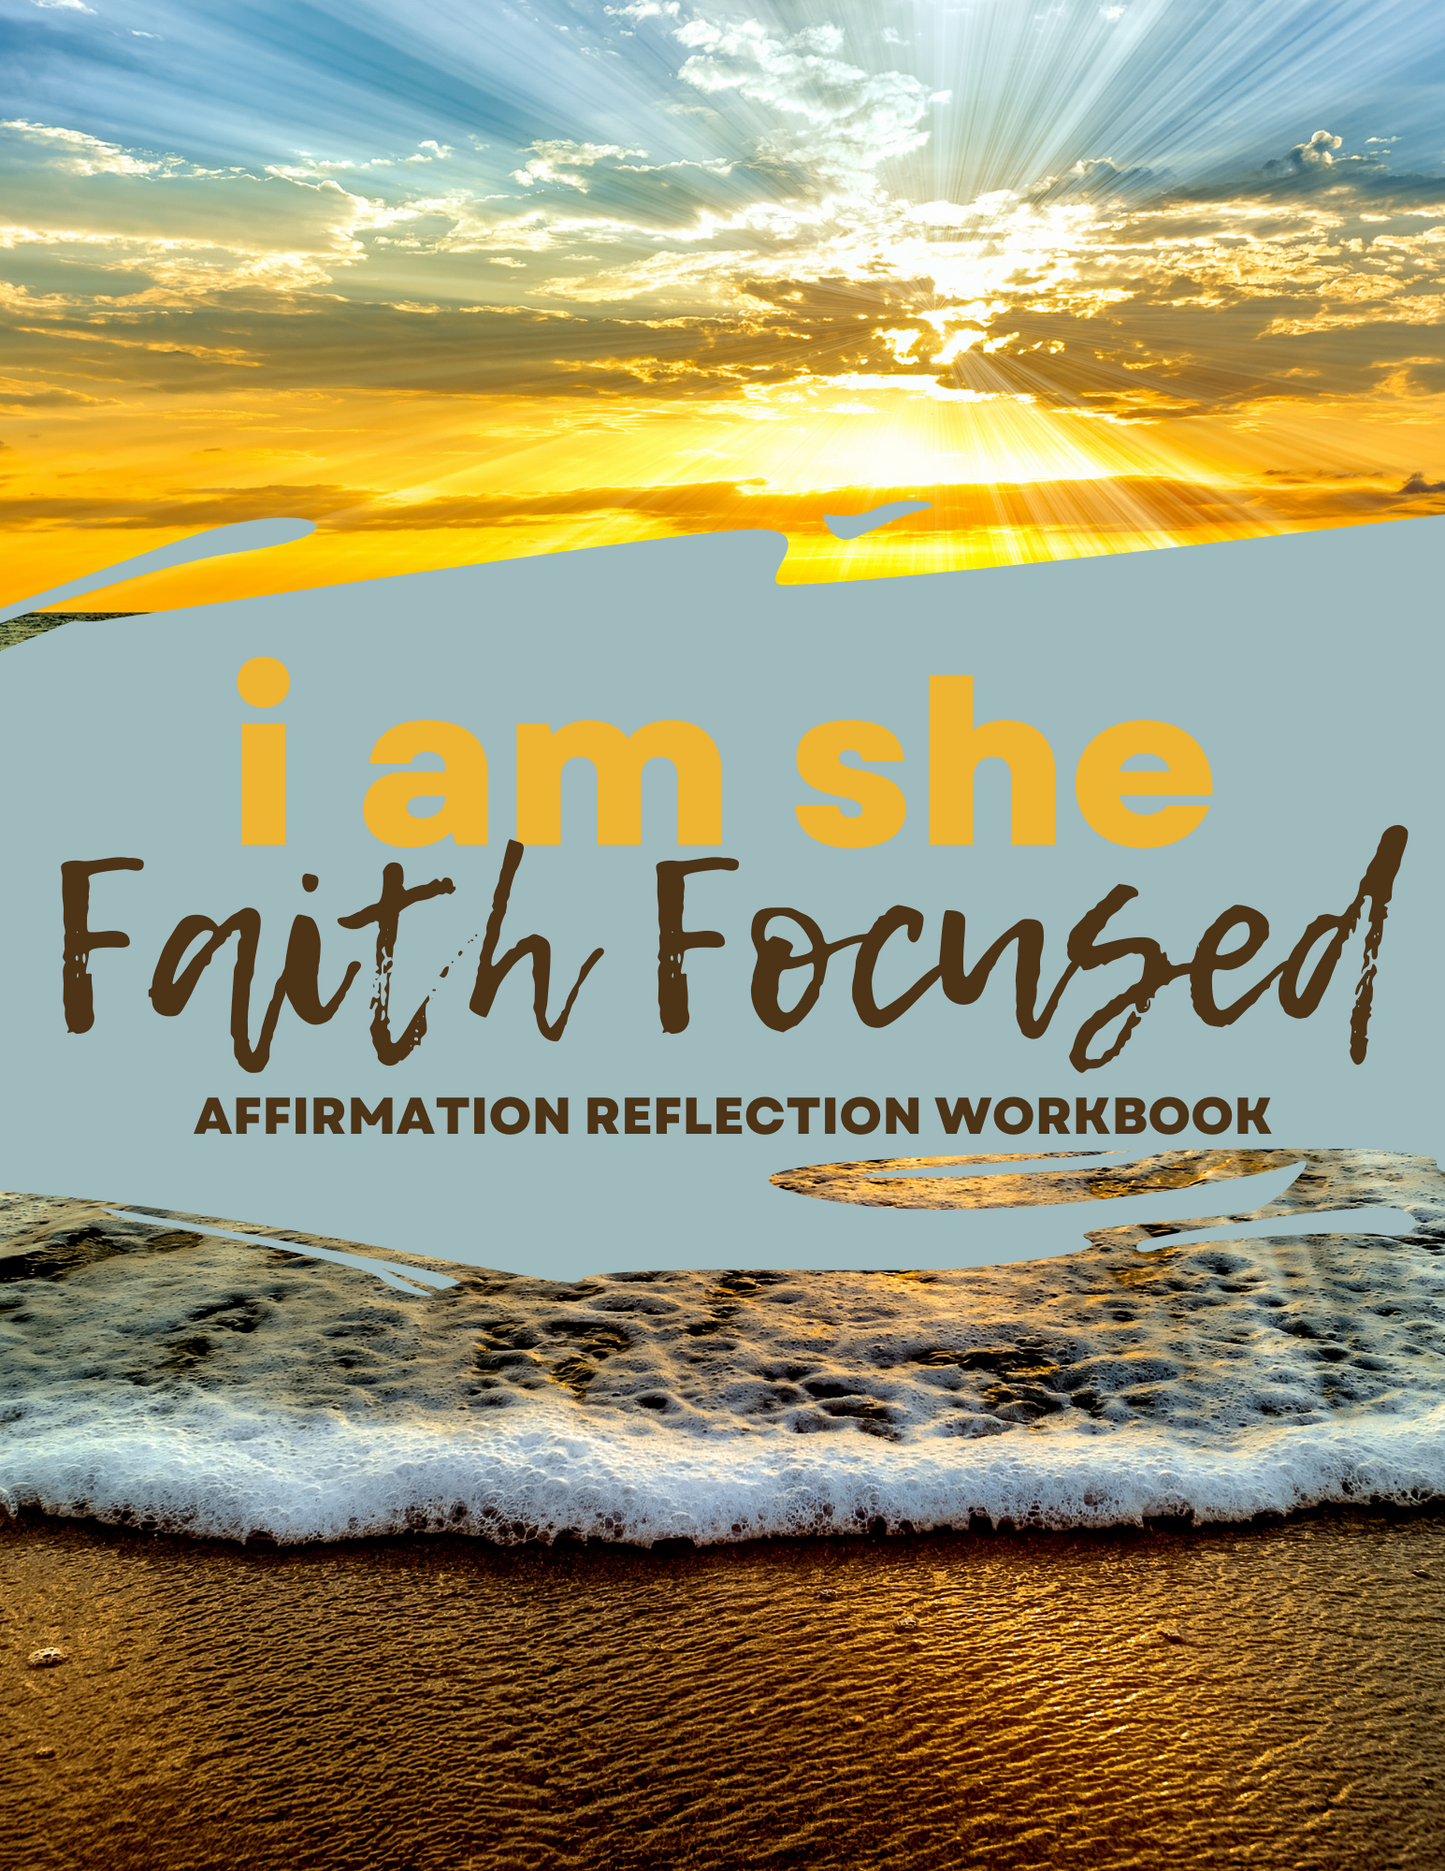 I AM She - Faith Focused Affirmation Reflection Workbook - Use as a lead magnet, digital product or challenge.